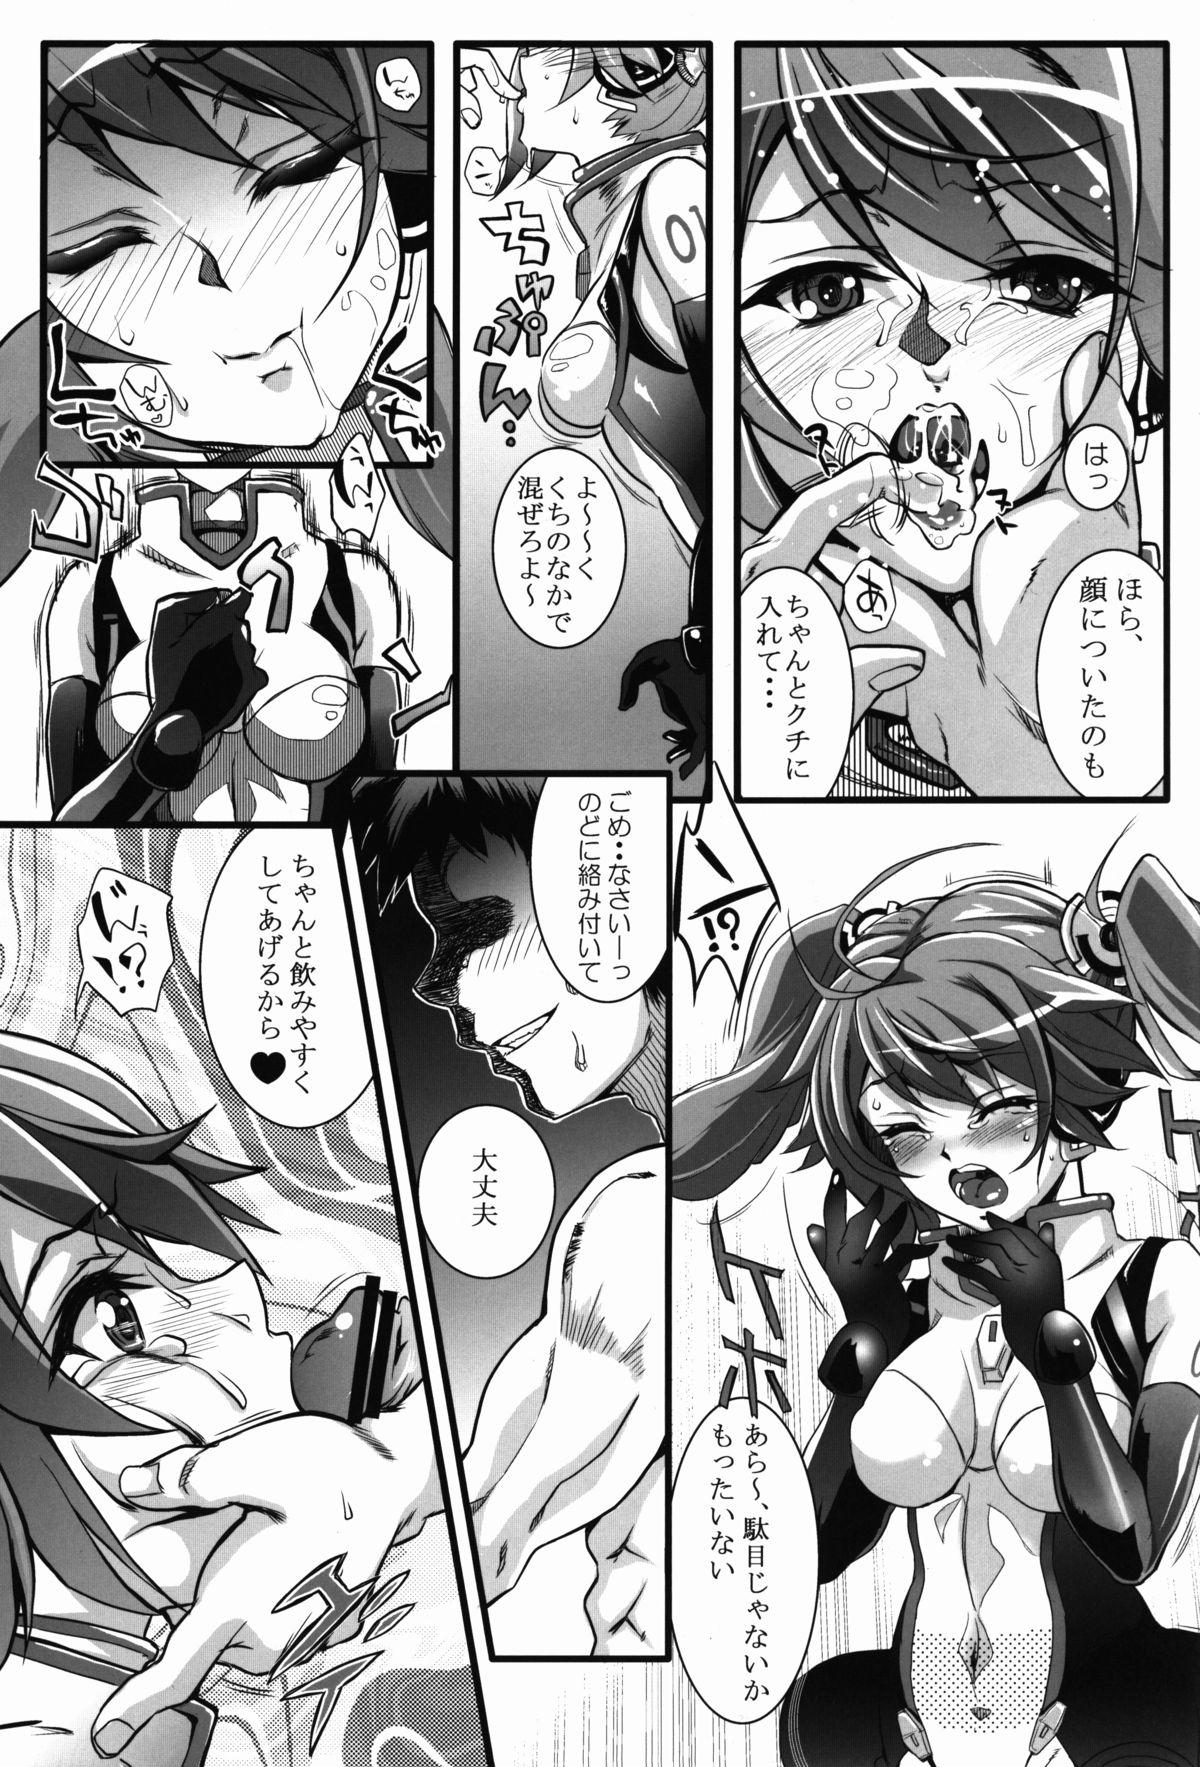 Nylons Racing Angeloid - Vocaloid Fucking Hard - Page 11